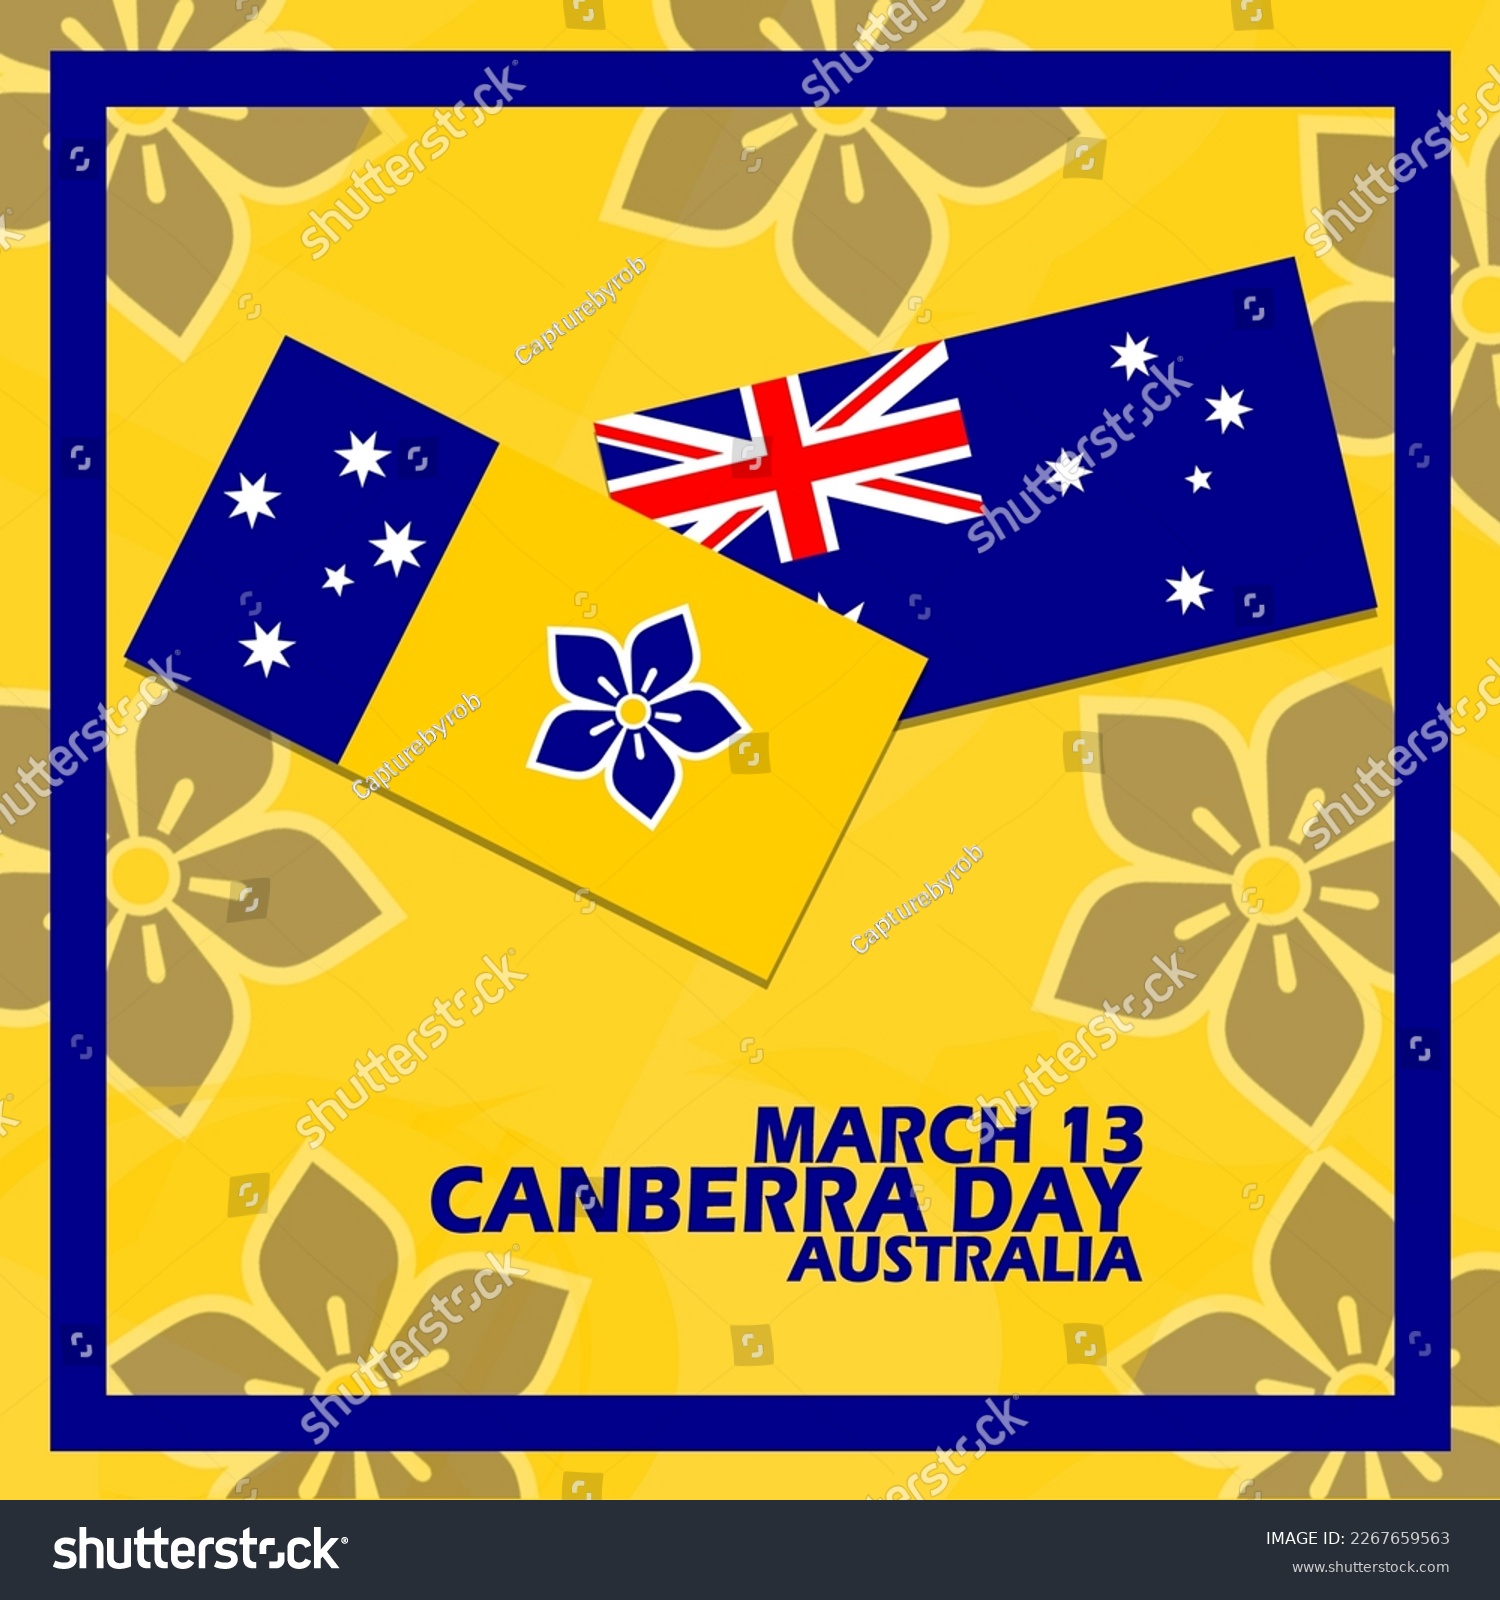 SVG of Canberra flag and Australian flag with bold text in a frame on a yellow background to commemorate Canberra Day on March 13 in Australia svg